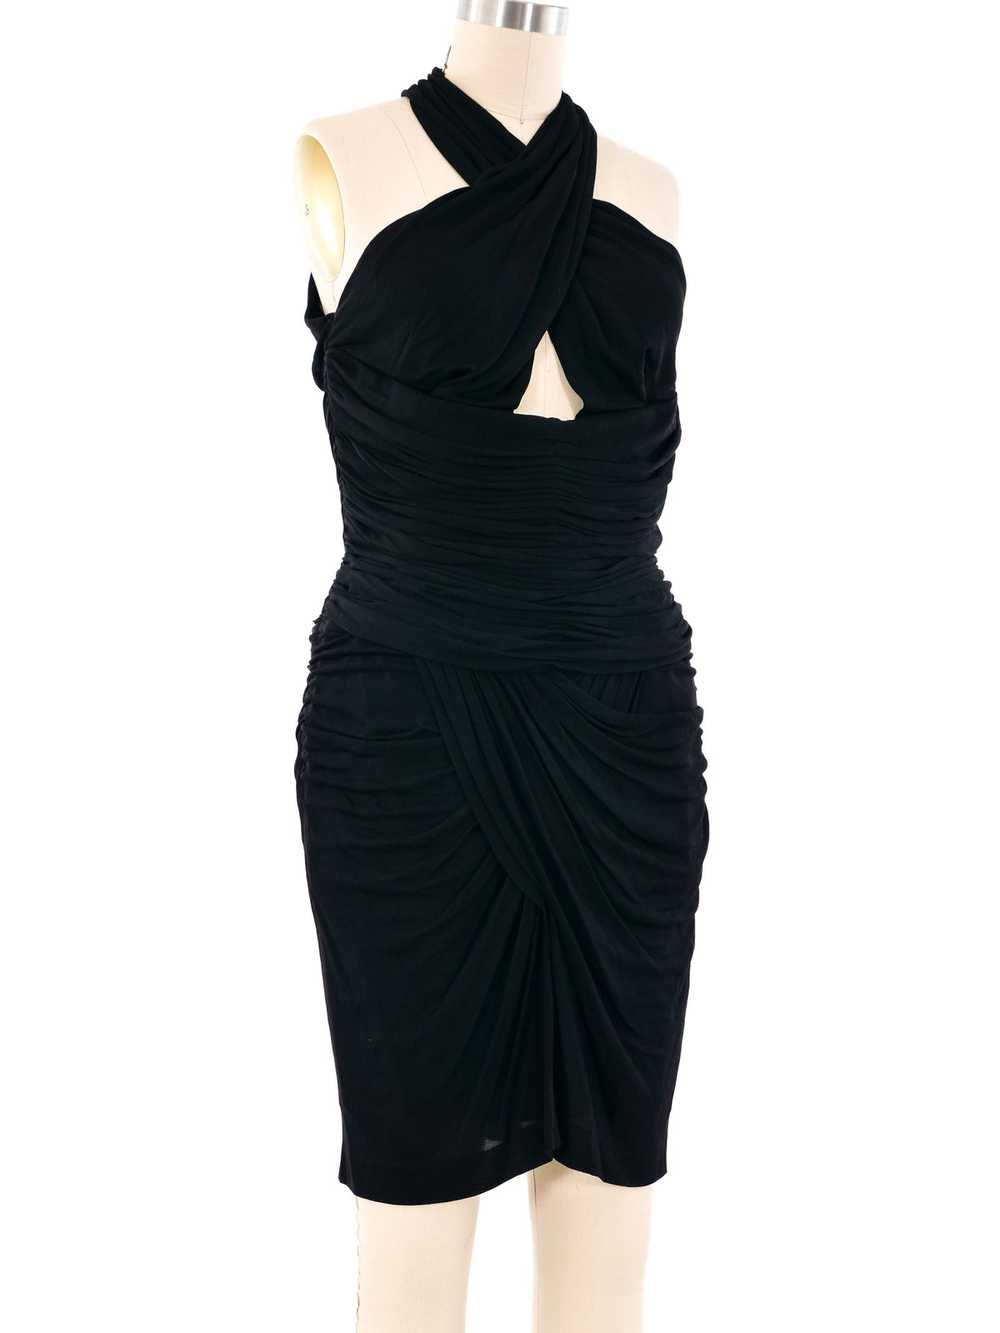 Vicky Tiel Ruched Jersey Dress - image 2